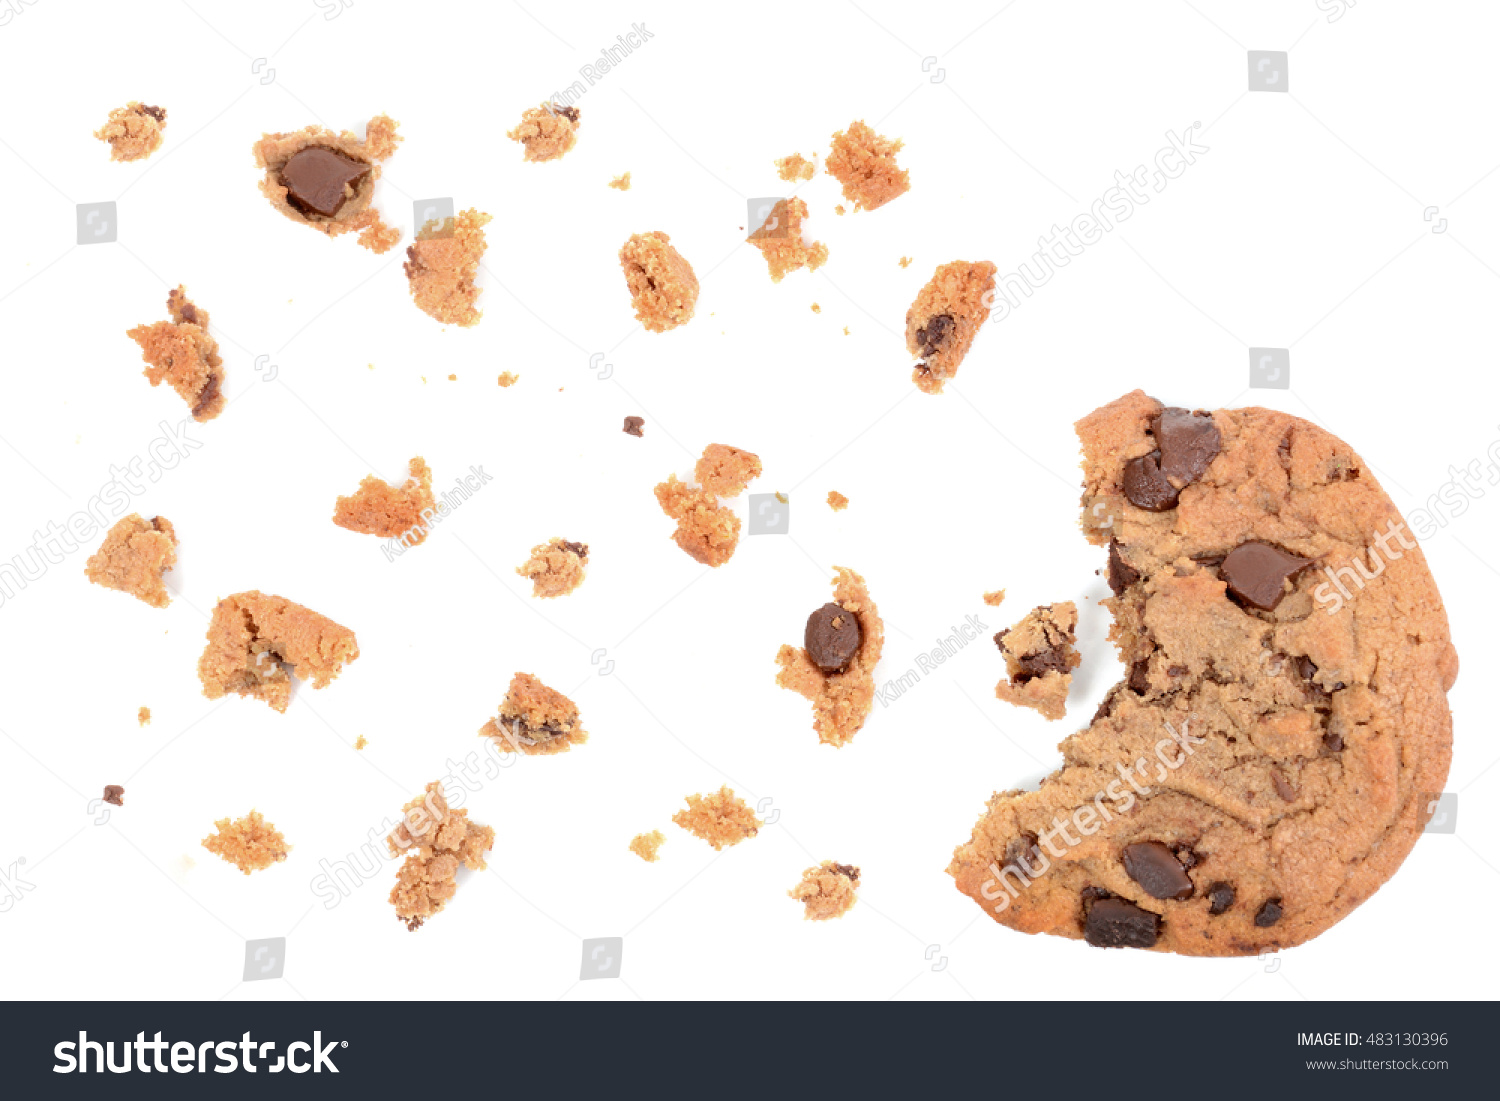 chocolate chip cookie pieces isolated on white background #483130396